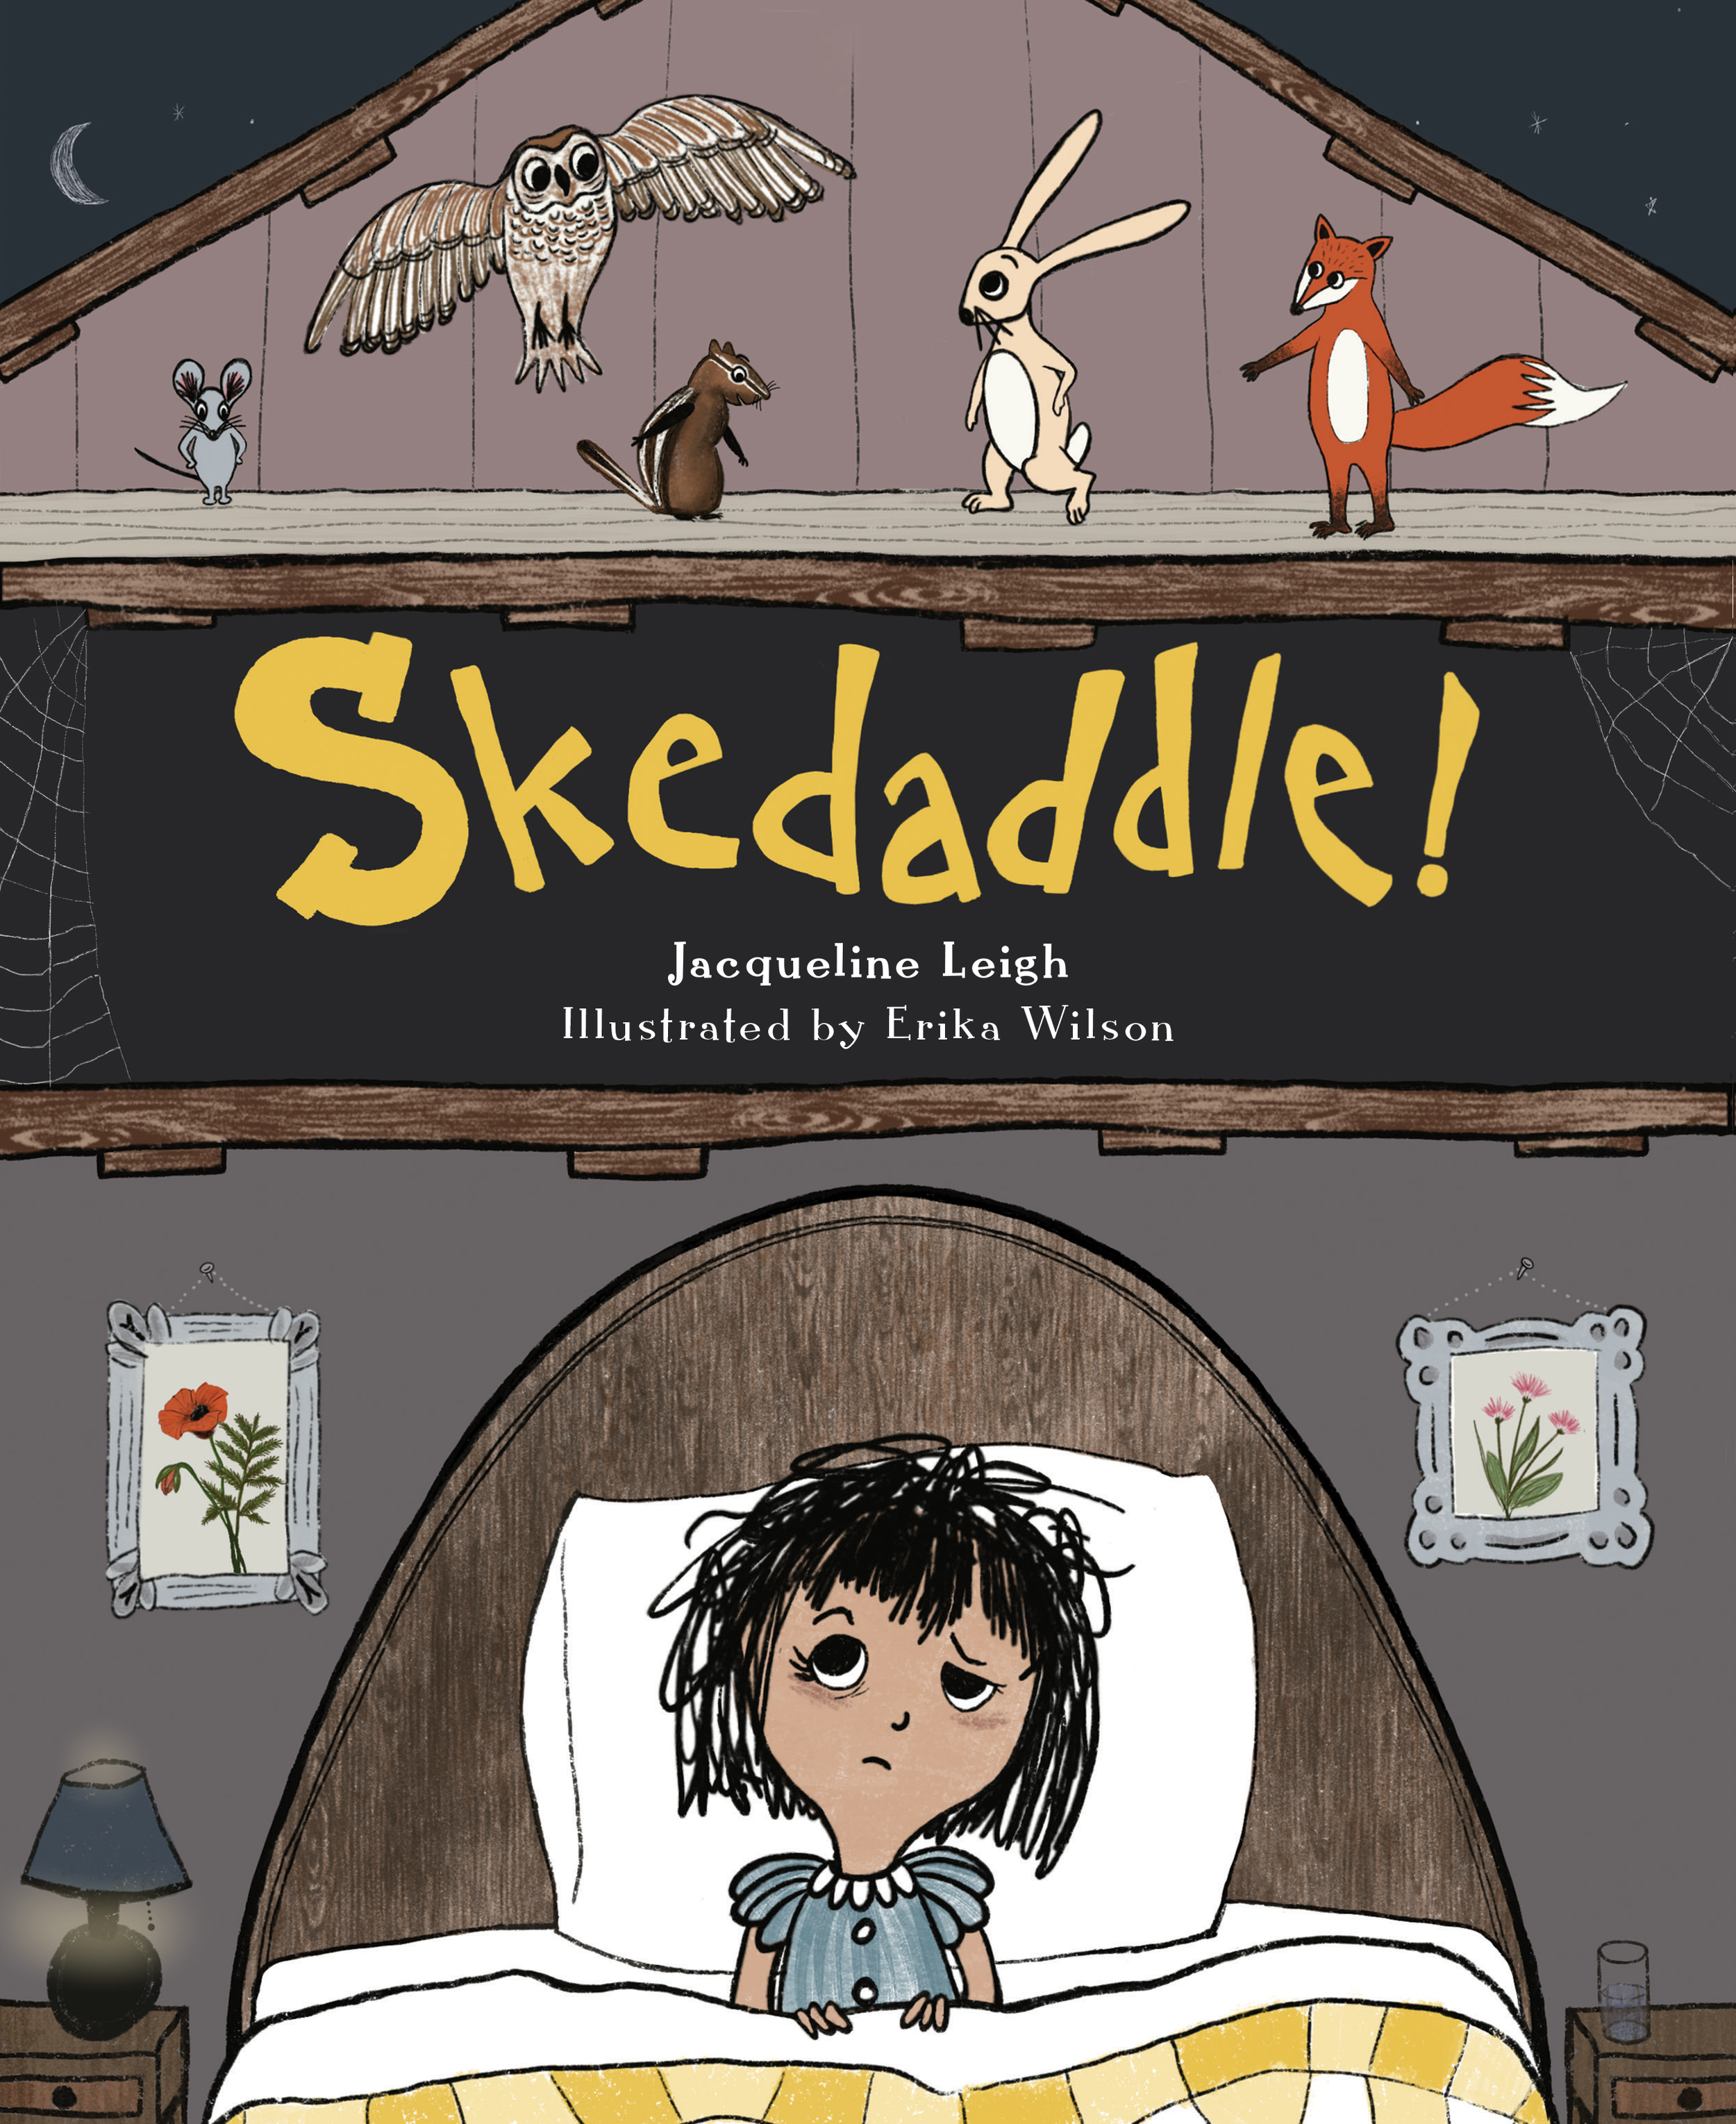 SKEDADDLE by Jacqueline Leigh